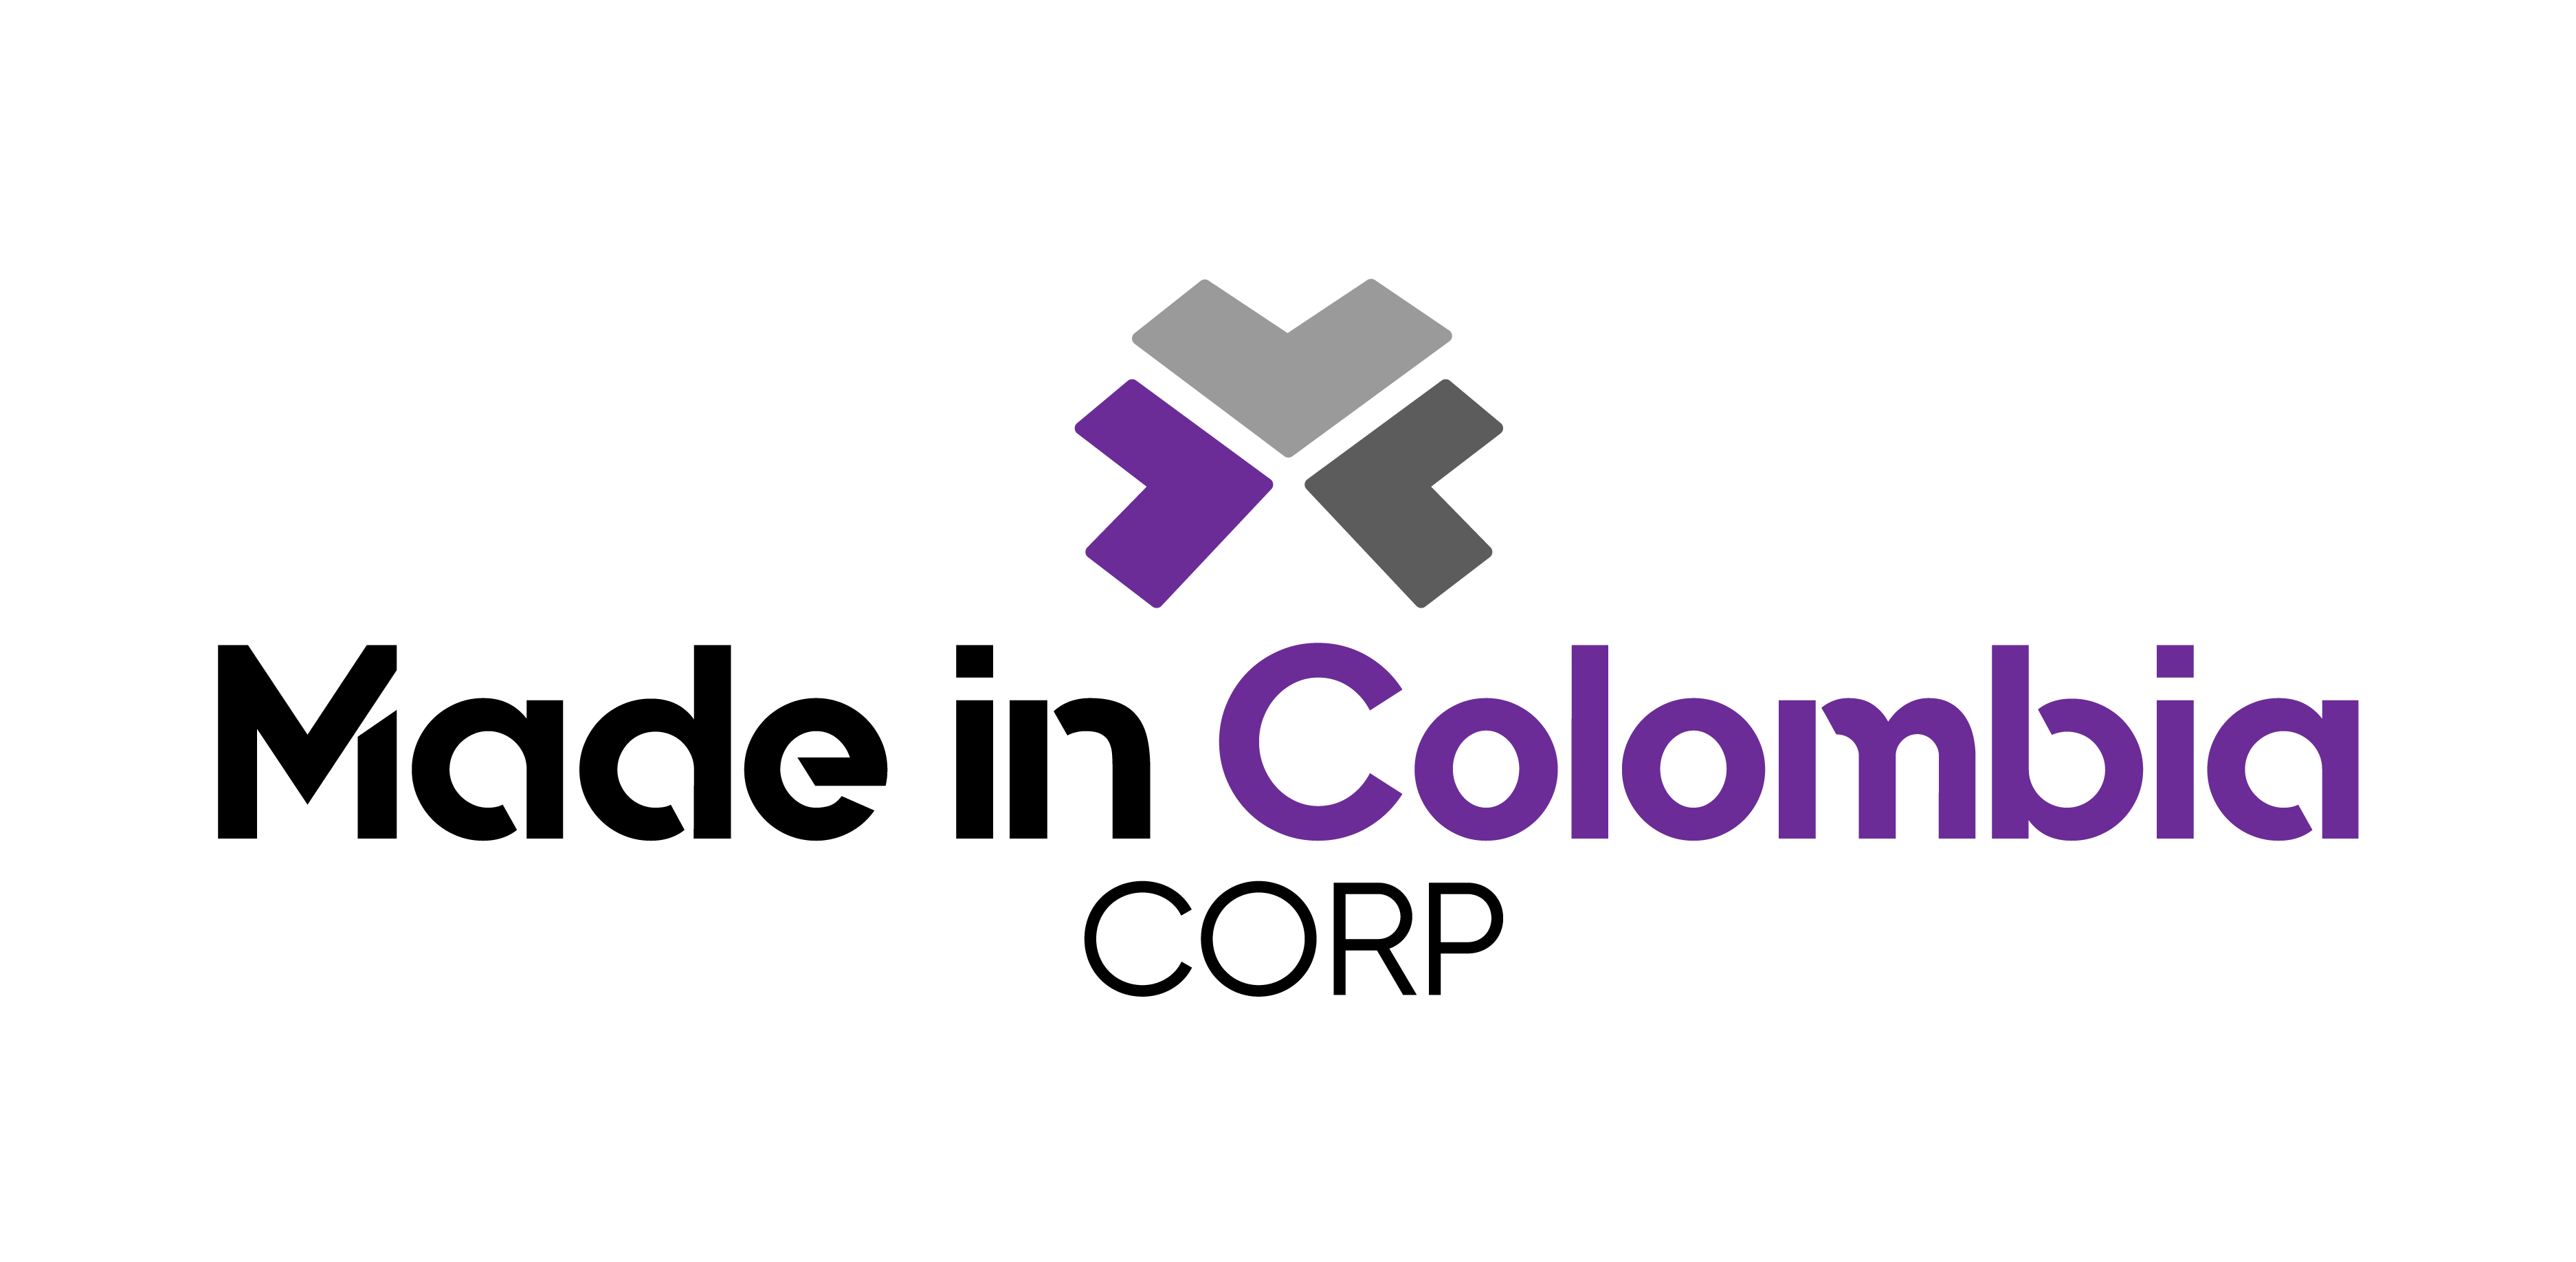 Made in Colombia CORP